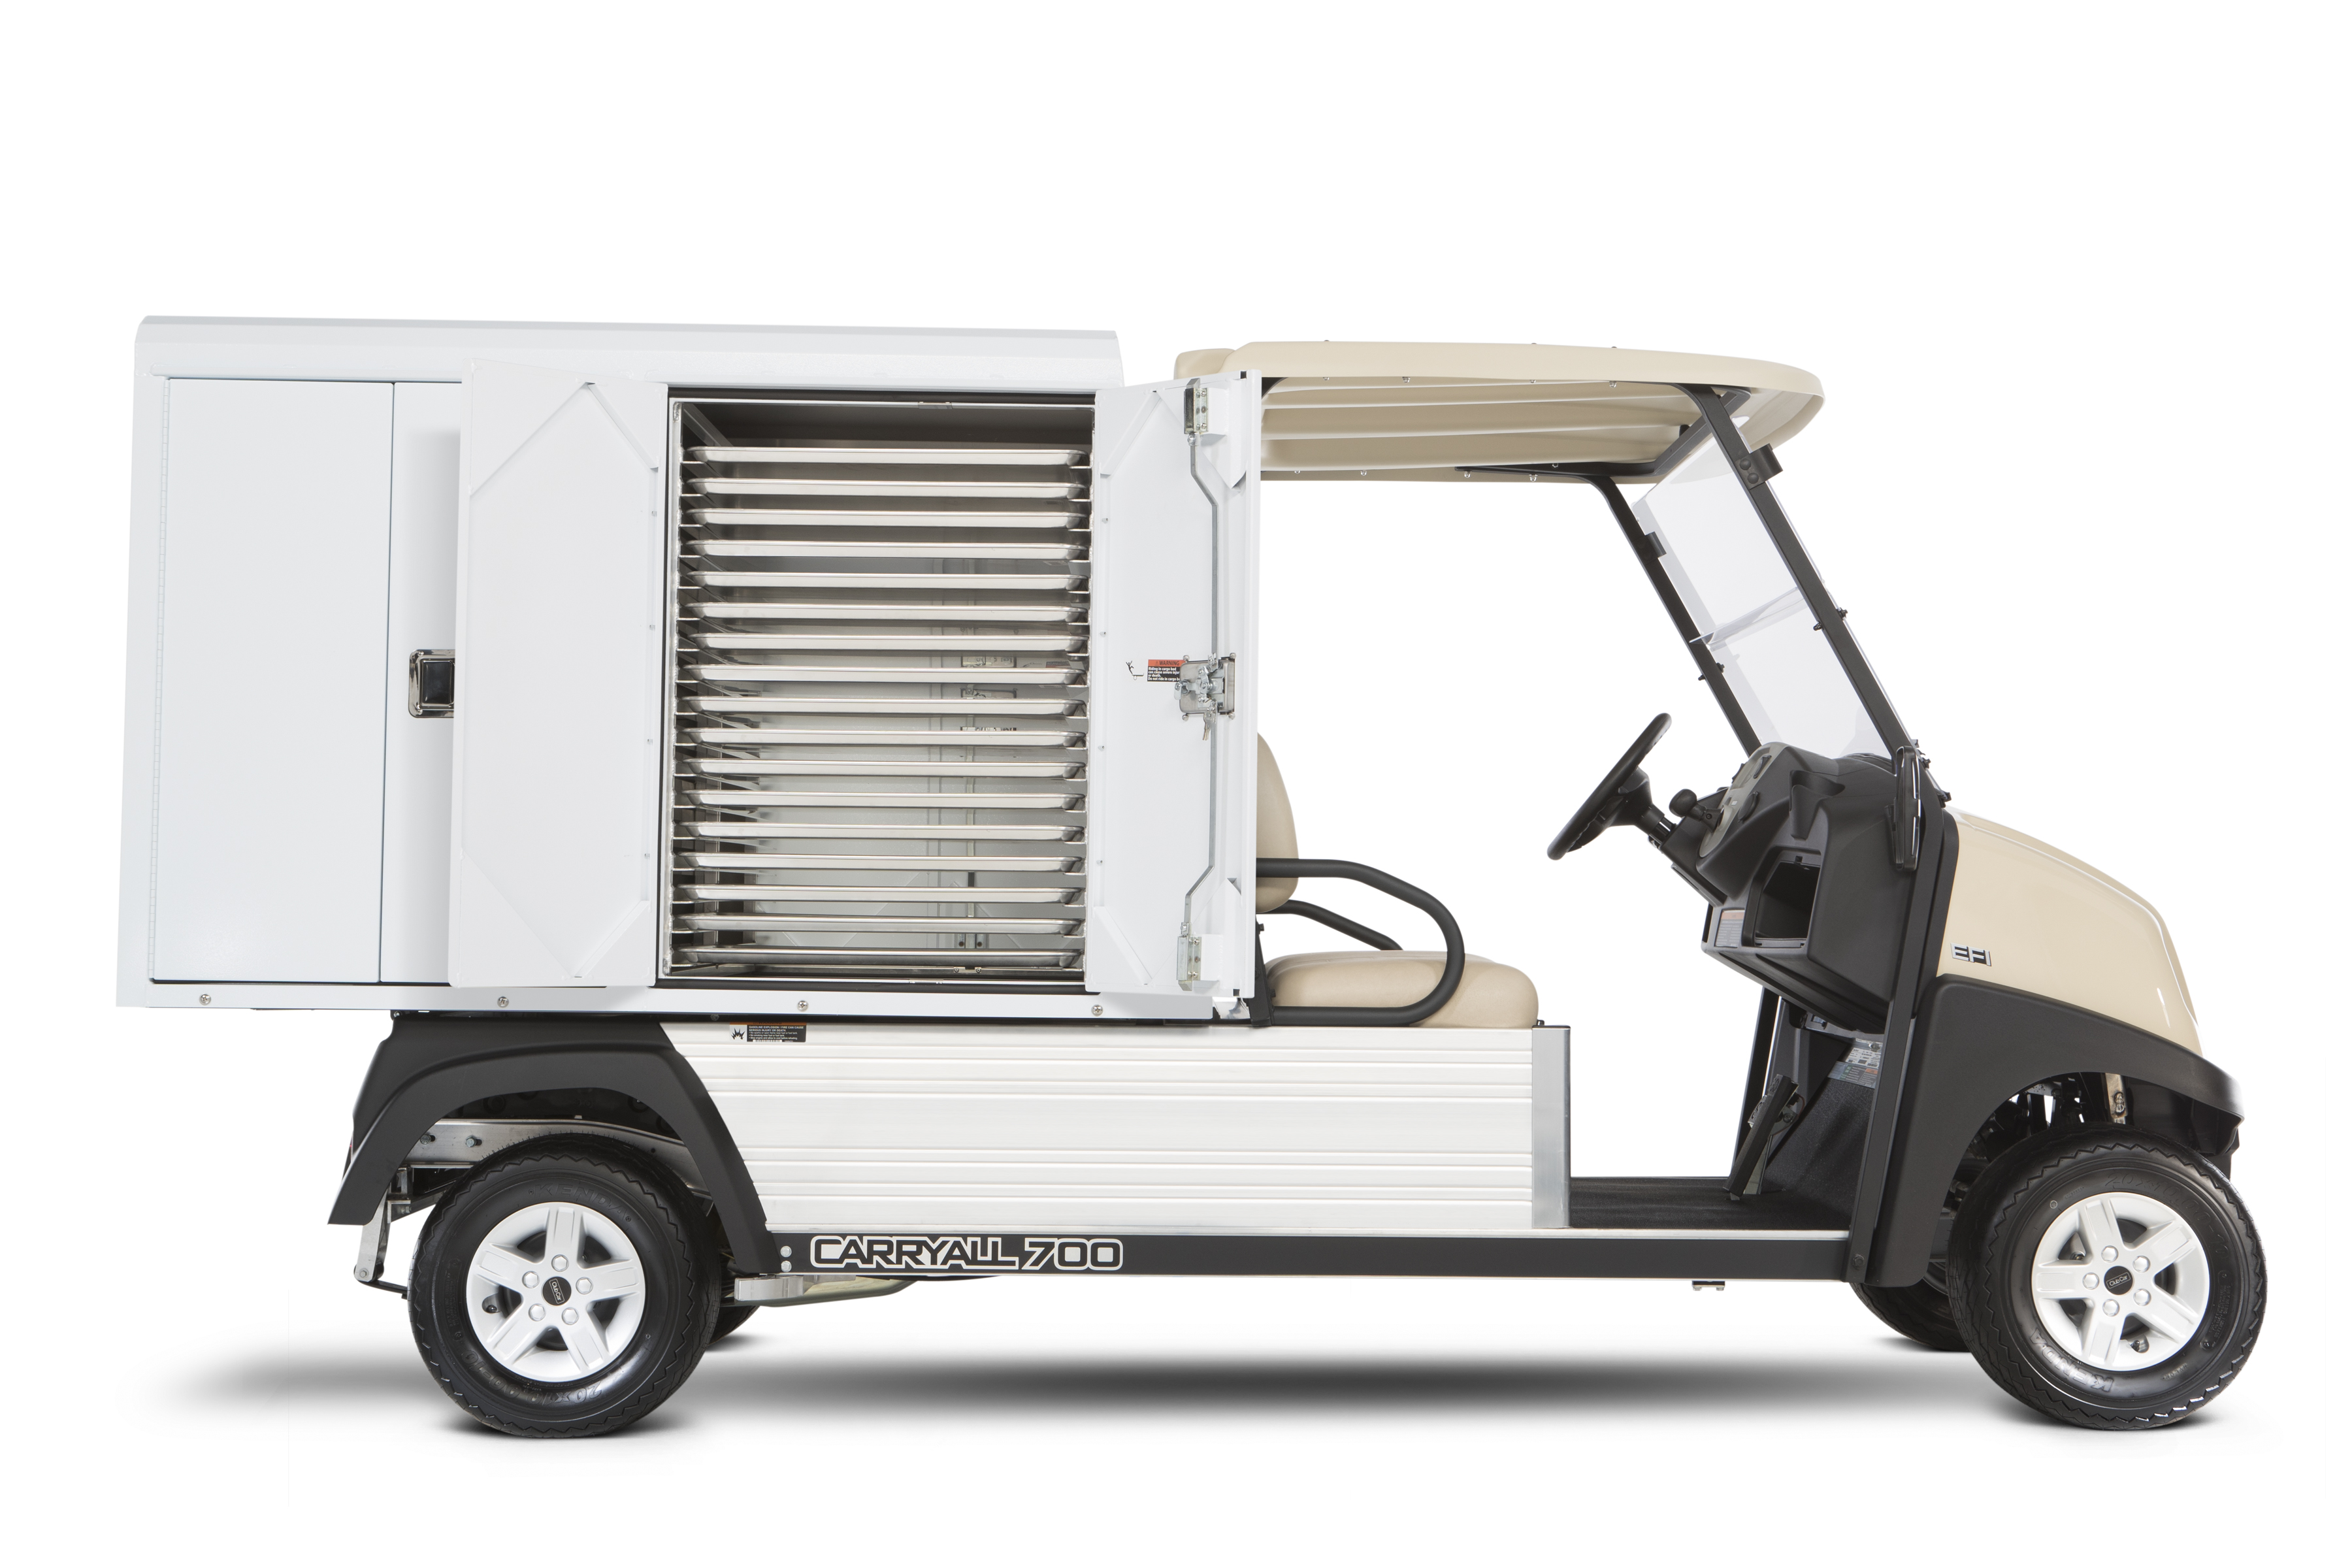 Keep your guests coming back for seconds with the new Carryall 700 Food Service Vehicle.